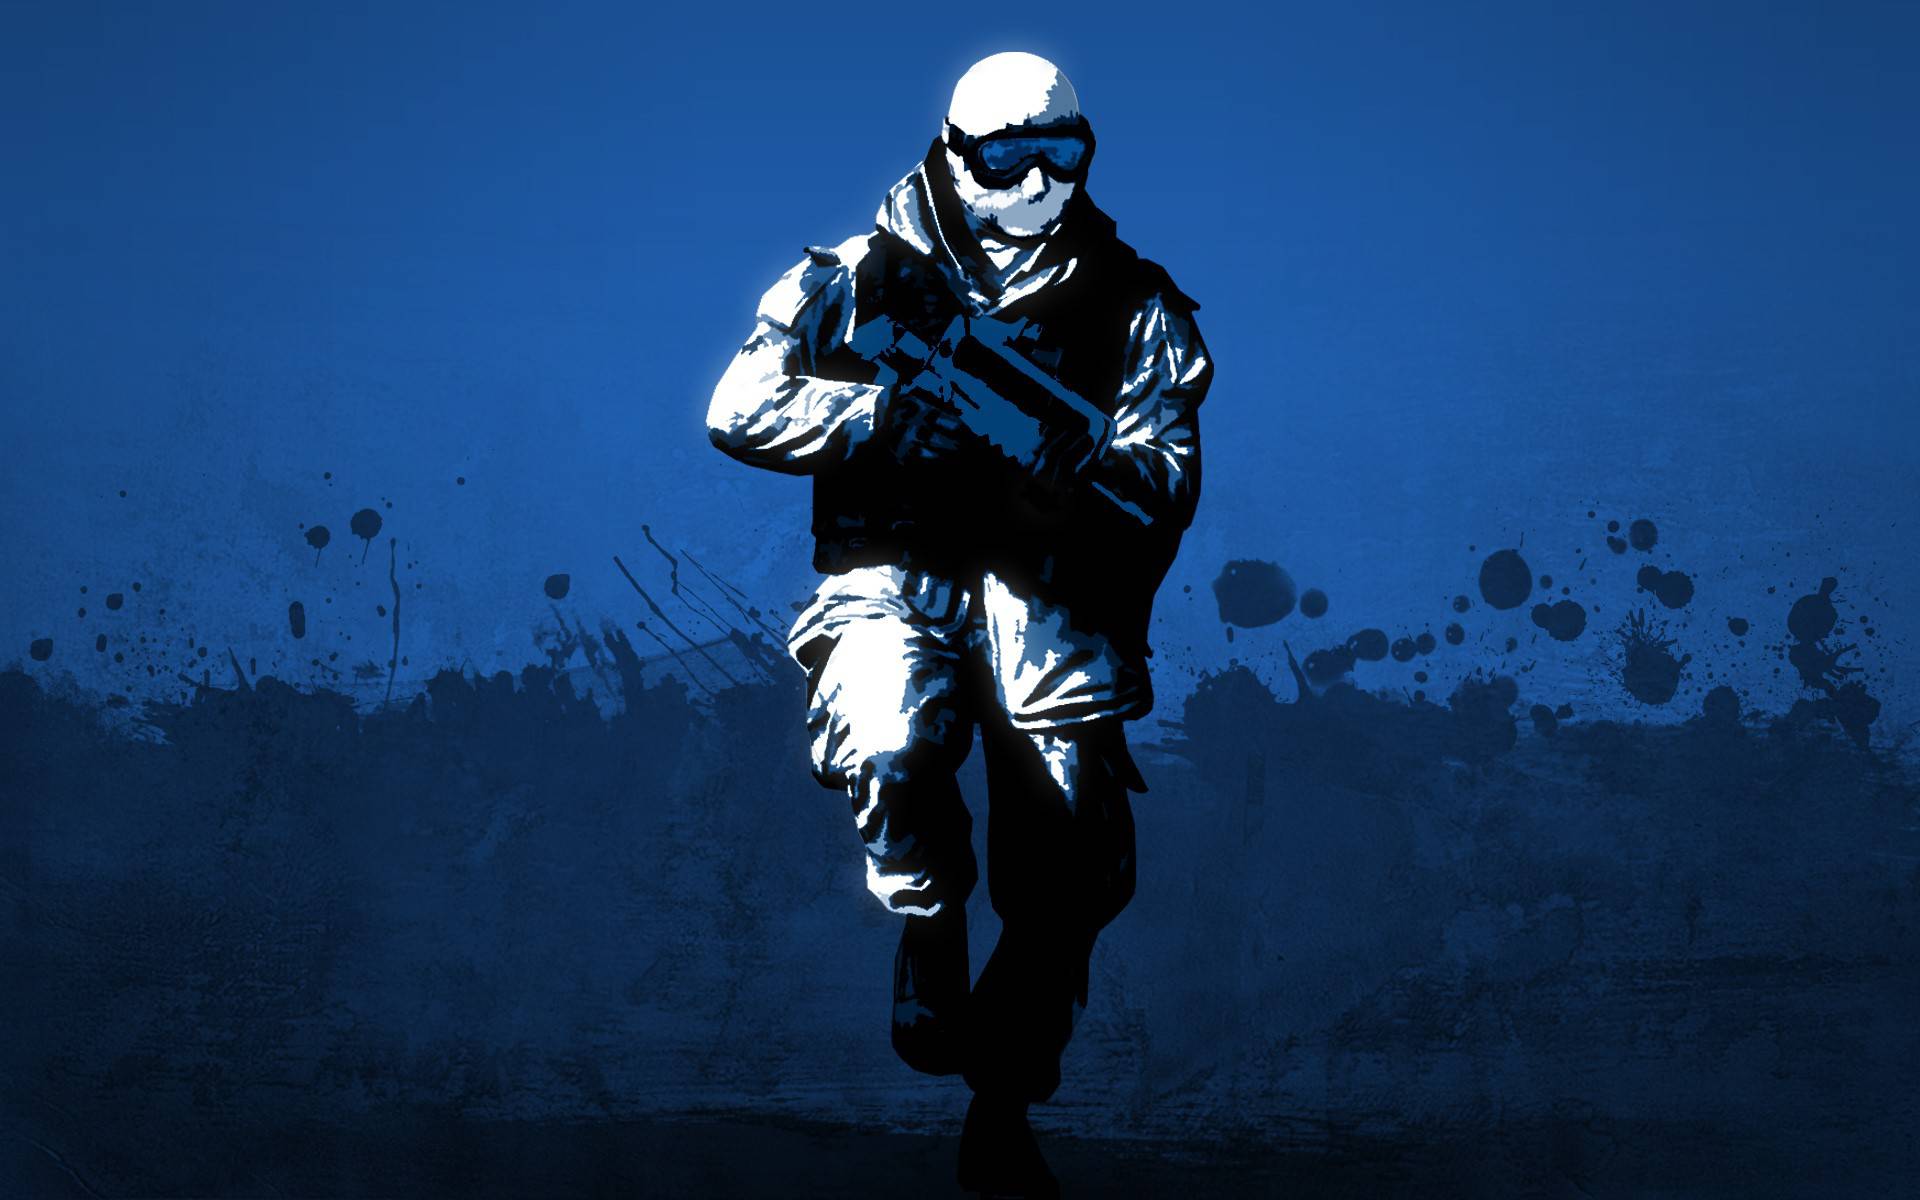 Special forces wallpaper - - High Quality and Resolution